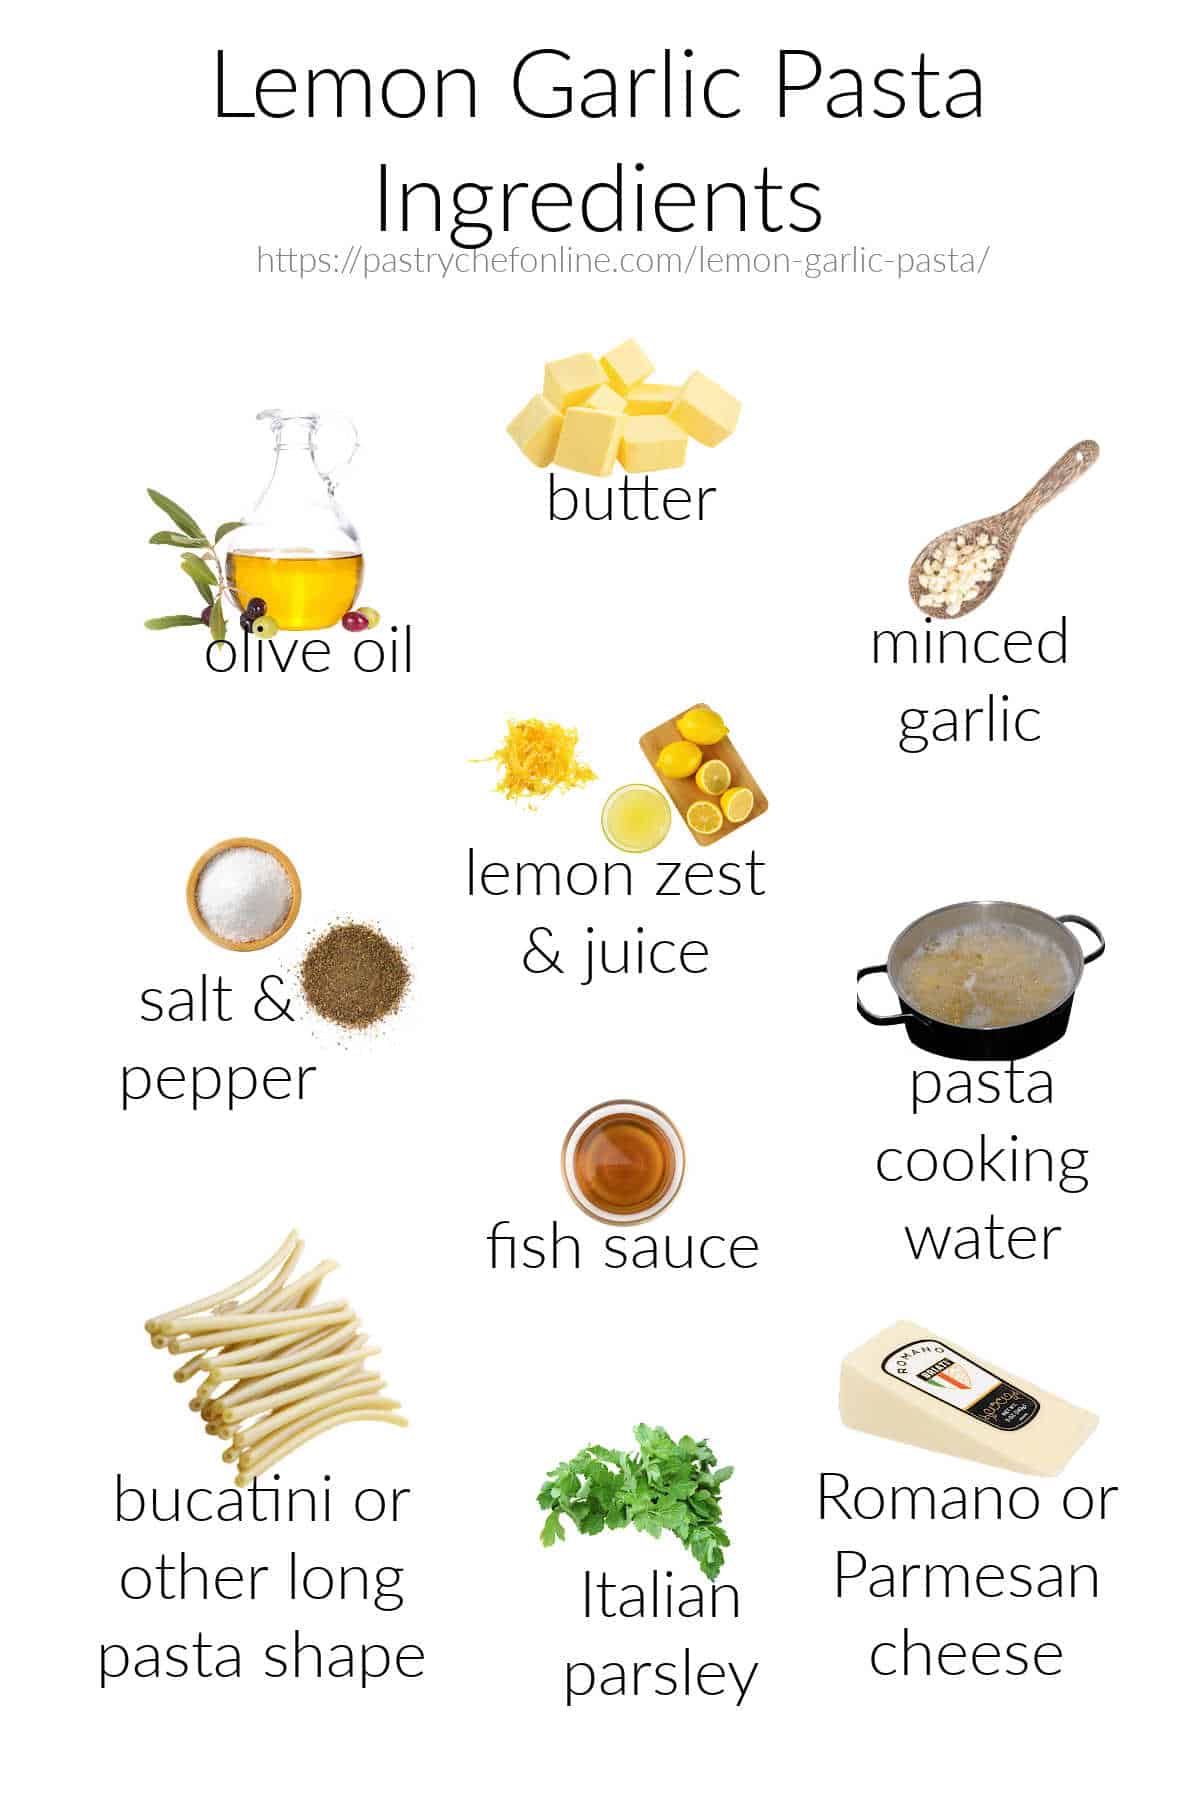 All the ingredients needed to make pasta al limone labeled and on a white background. The ingredients are oliv oil, butter, garlic, lemon zesst, lemon juice, salt & pepper, pasta cooking water, fish sauce, bucatini or other long pasta shape, flat leaf parsley, and Pecorino Romao cheese.